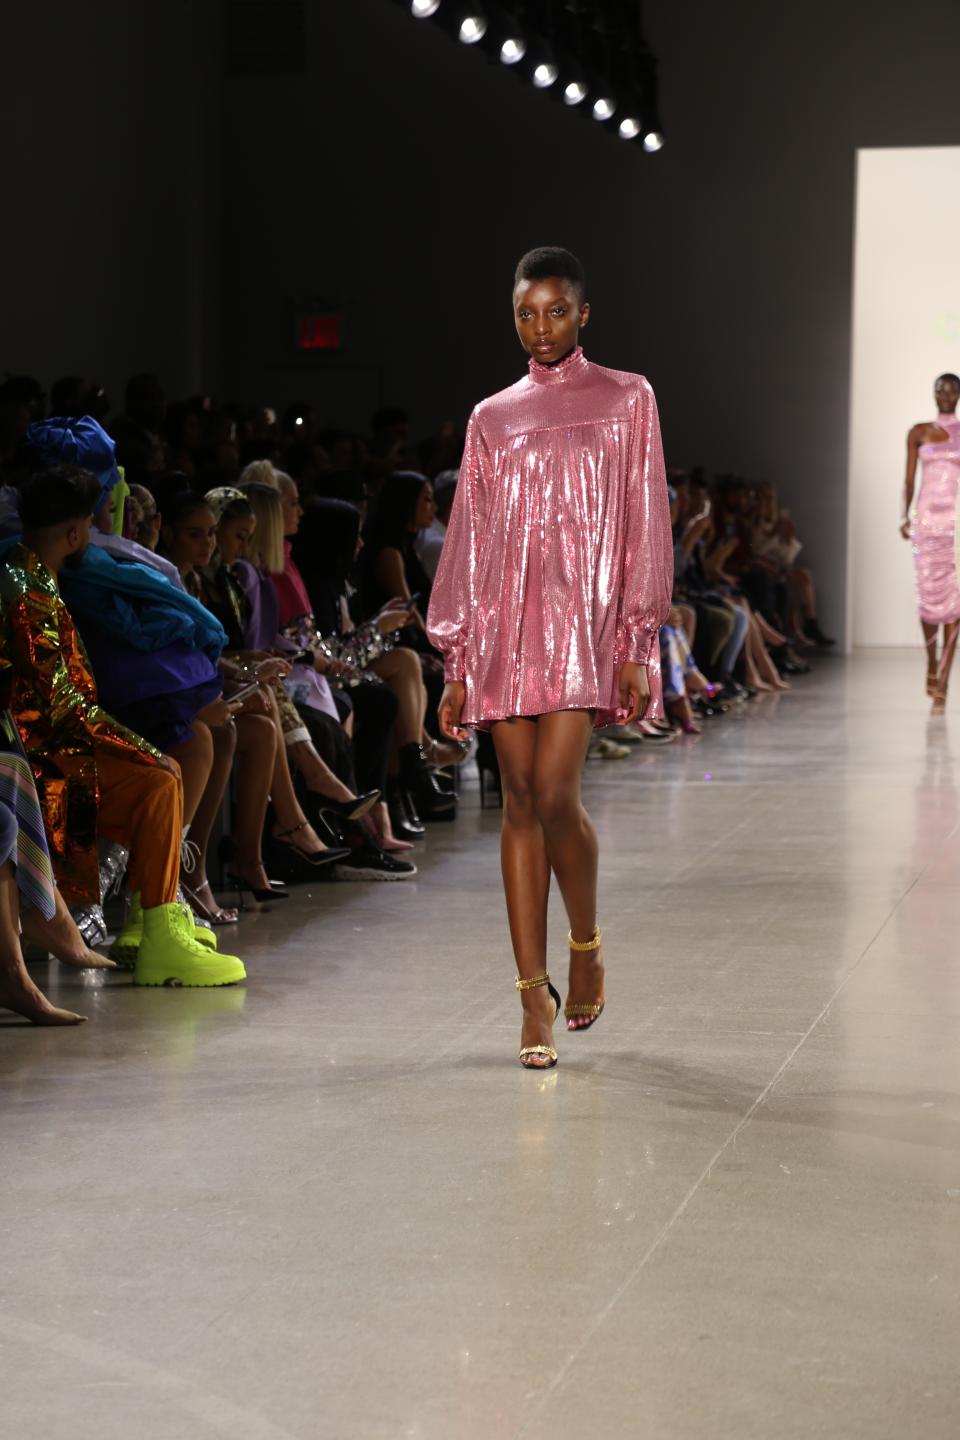 A model wears fashion from the Christian Cowan collection during Fashion Week in New York on Tuesday, Sept. 10, 2019. (AP Photo/Ragan Clark)